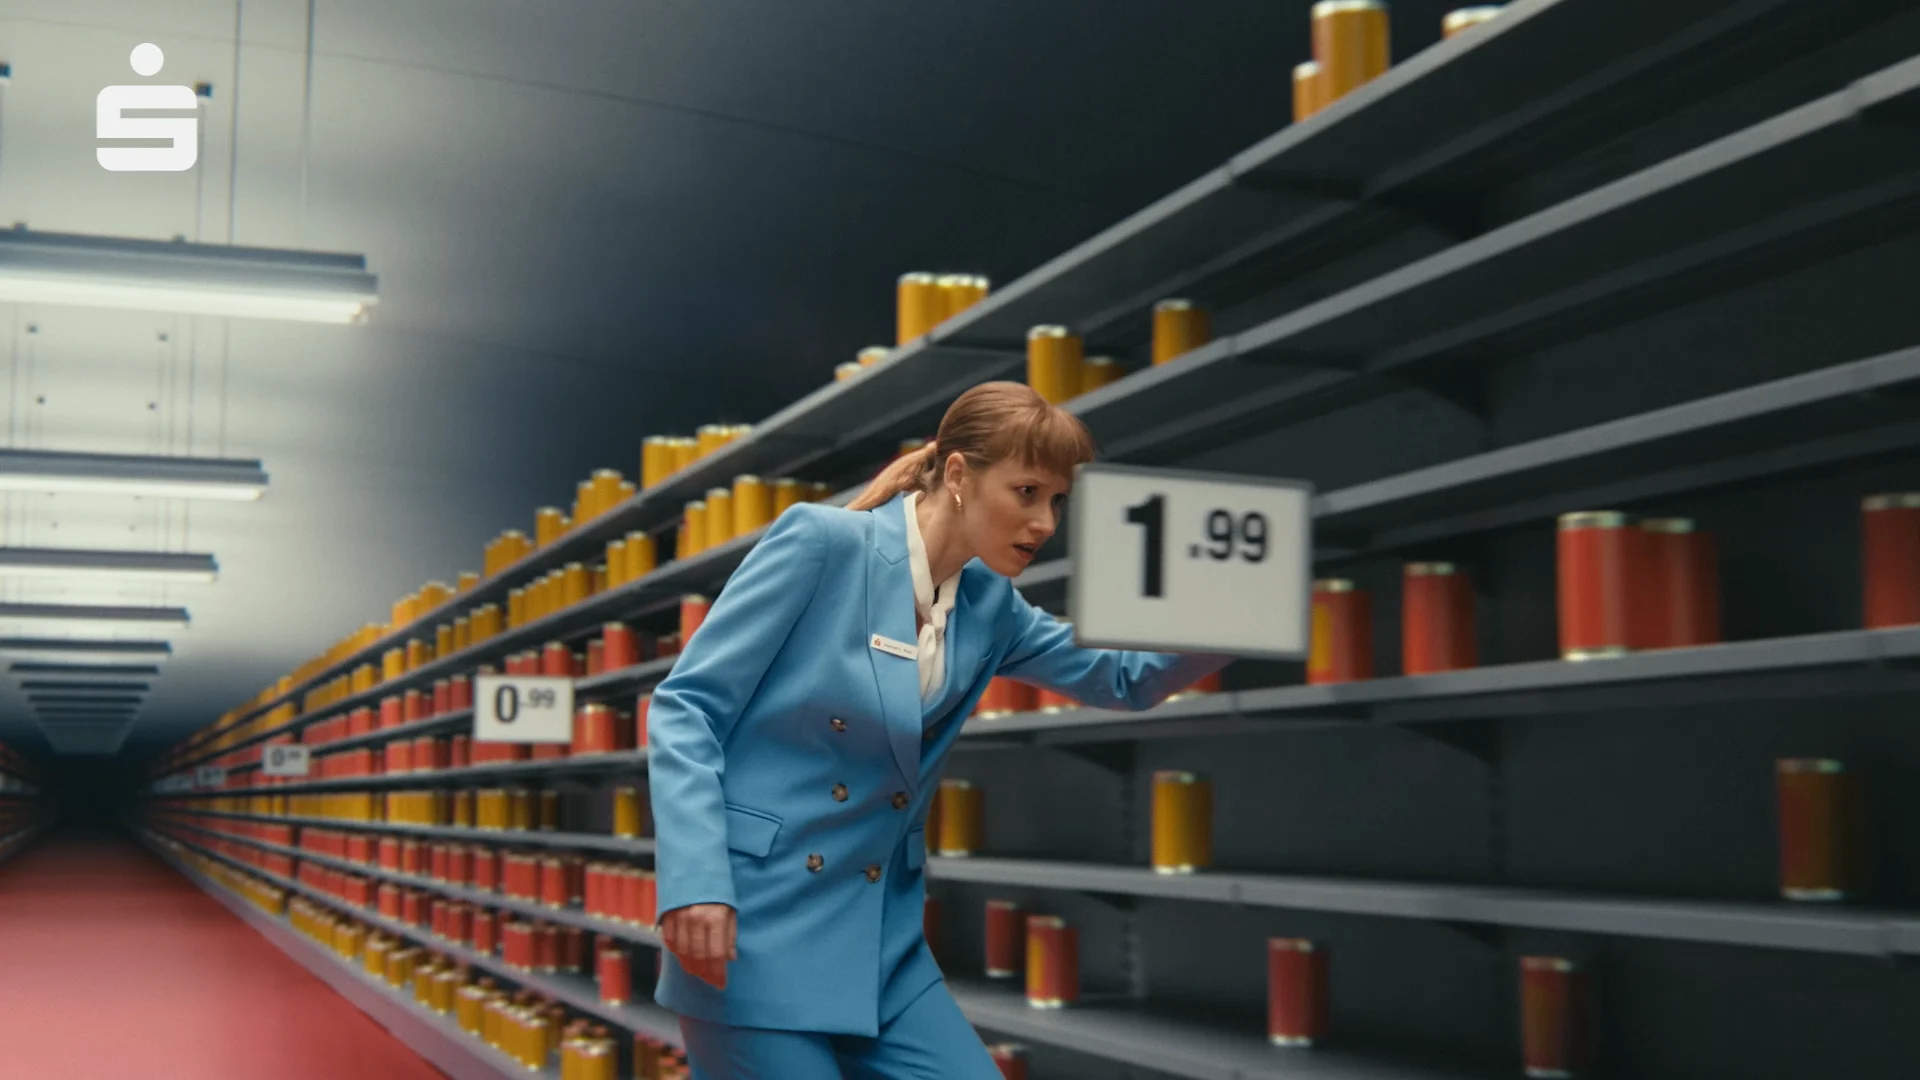 a woman walking between two shelves in a super markes and trying to pick up a can out of one shelf. in both shelves there are red and orange cans and price tags